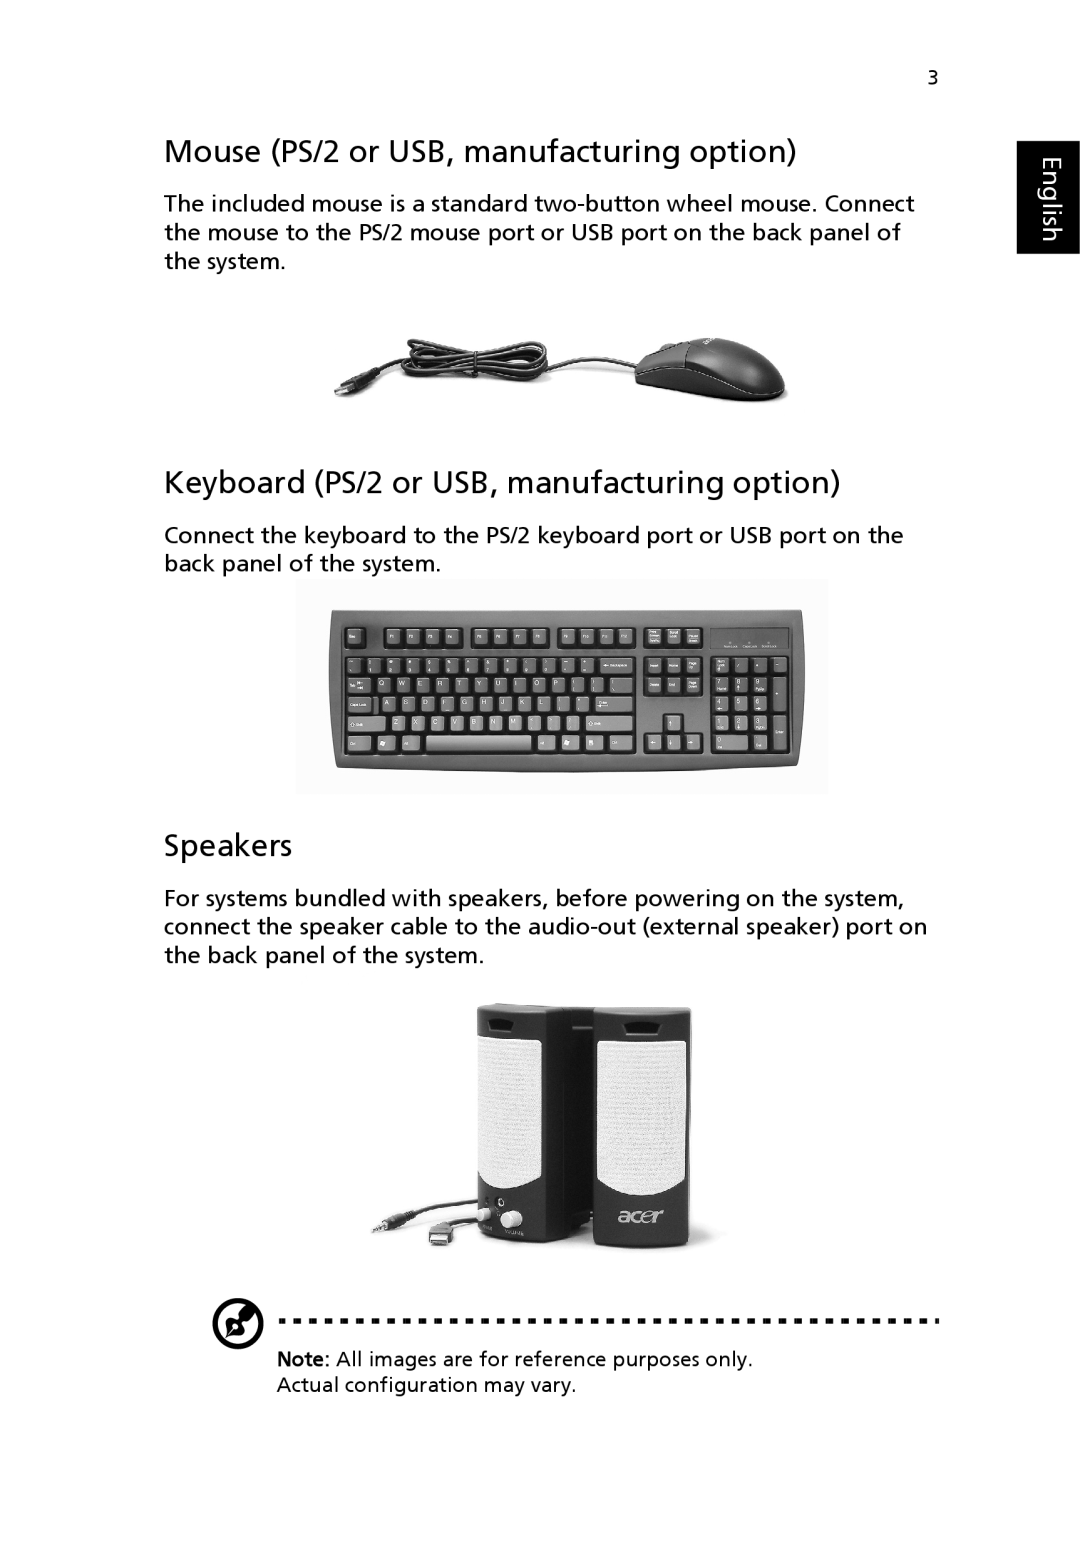 Acer POWER SERIES Mouse PS/2 or USB, manufacturing option, Keyboard PS/2 or USB, manufacturing option, Speakers, English 